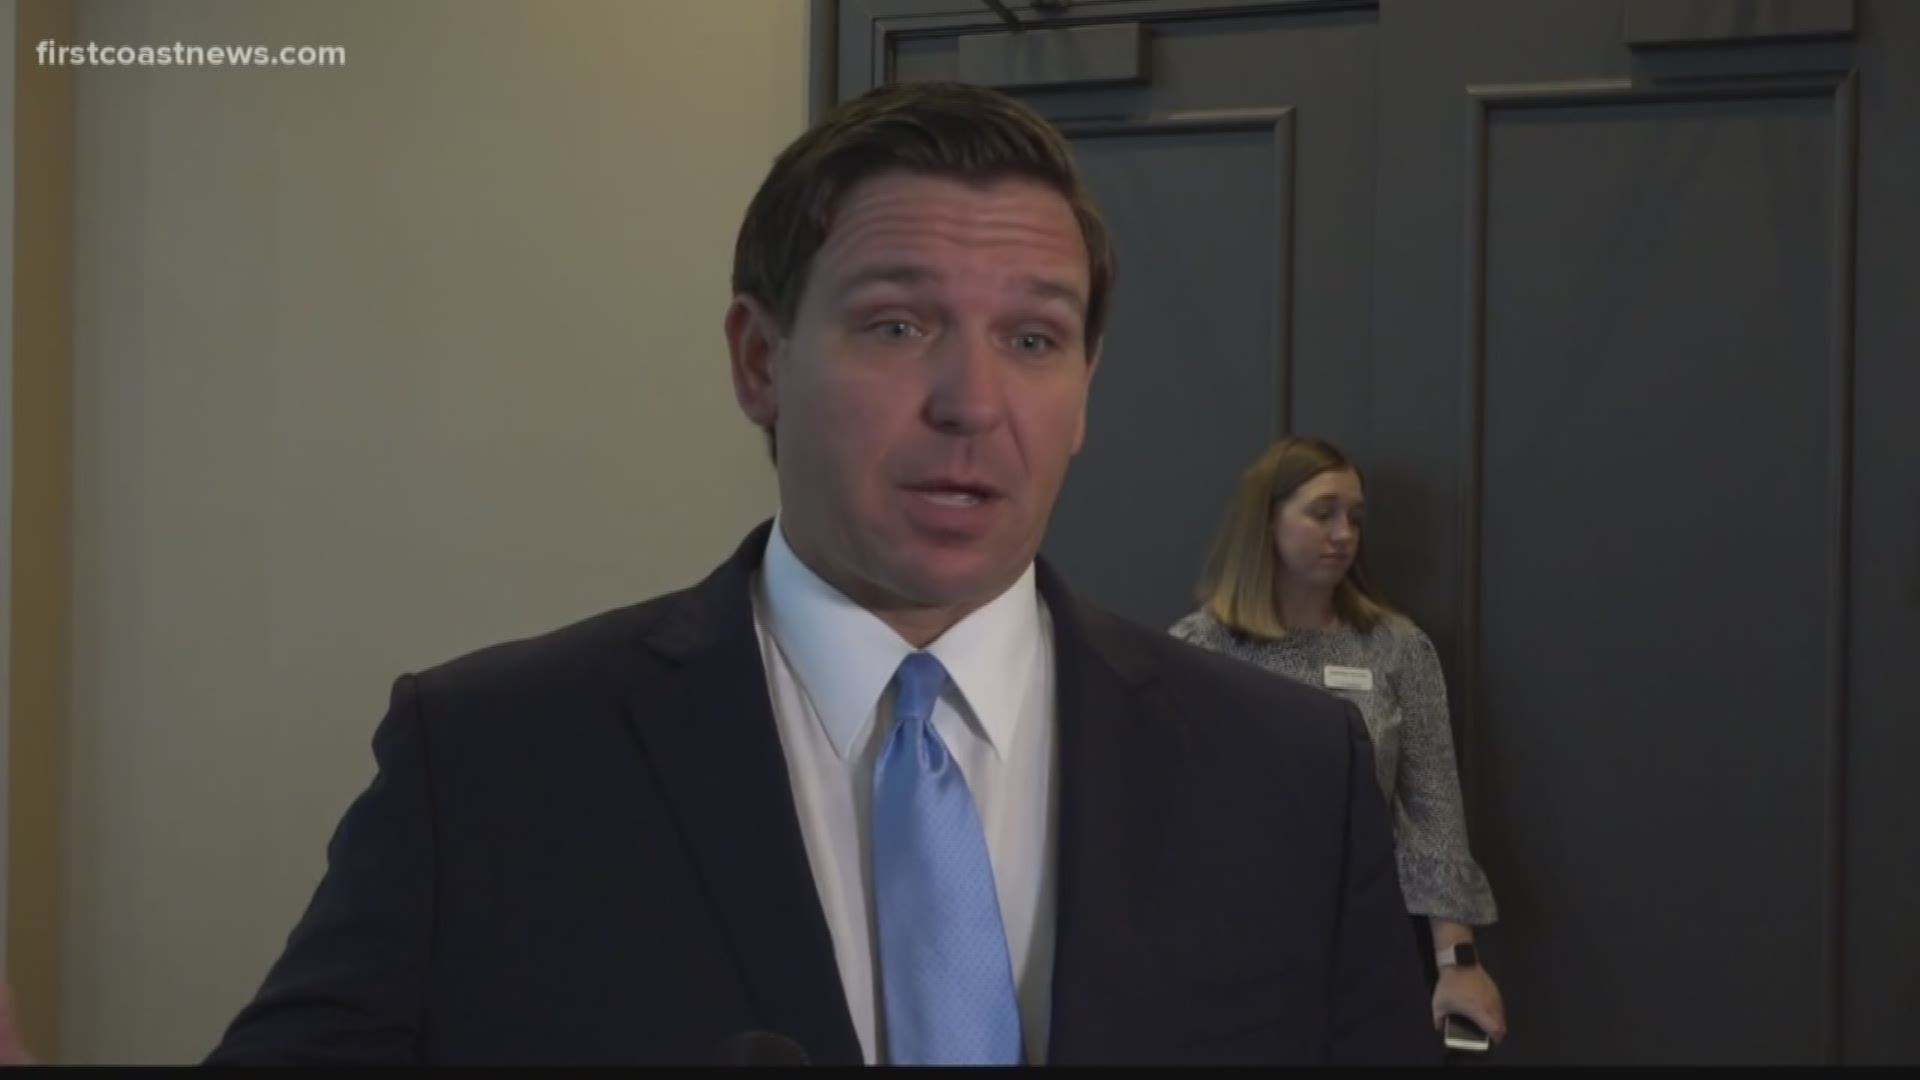 Fla. Gov. Ron DeSantis is urging all residents on Florida's east coast to prepare for impact from Hurricane Dorian, which is predicted to become a dangerous hurricane.